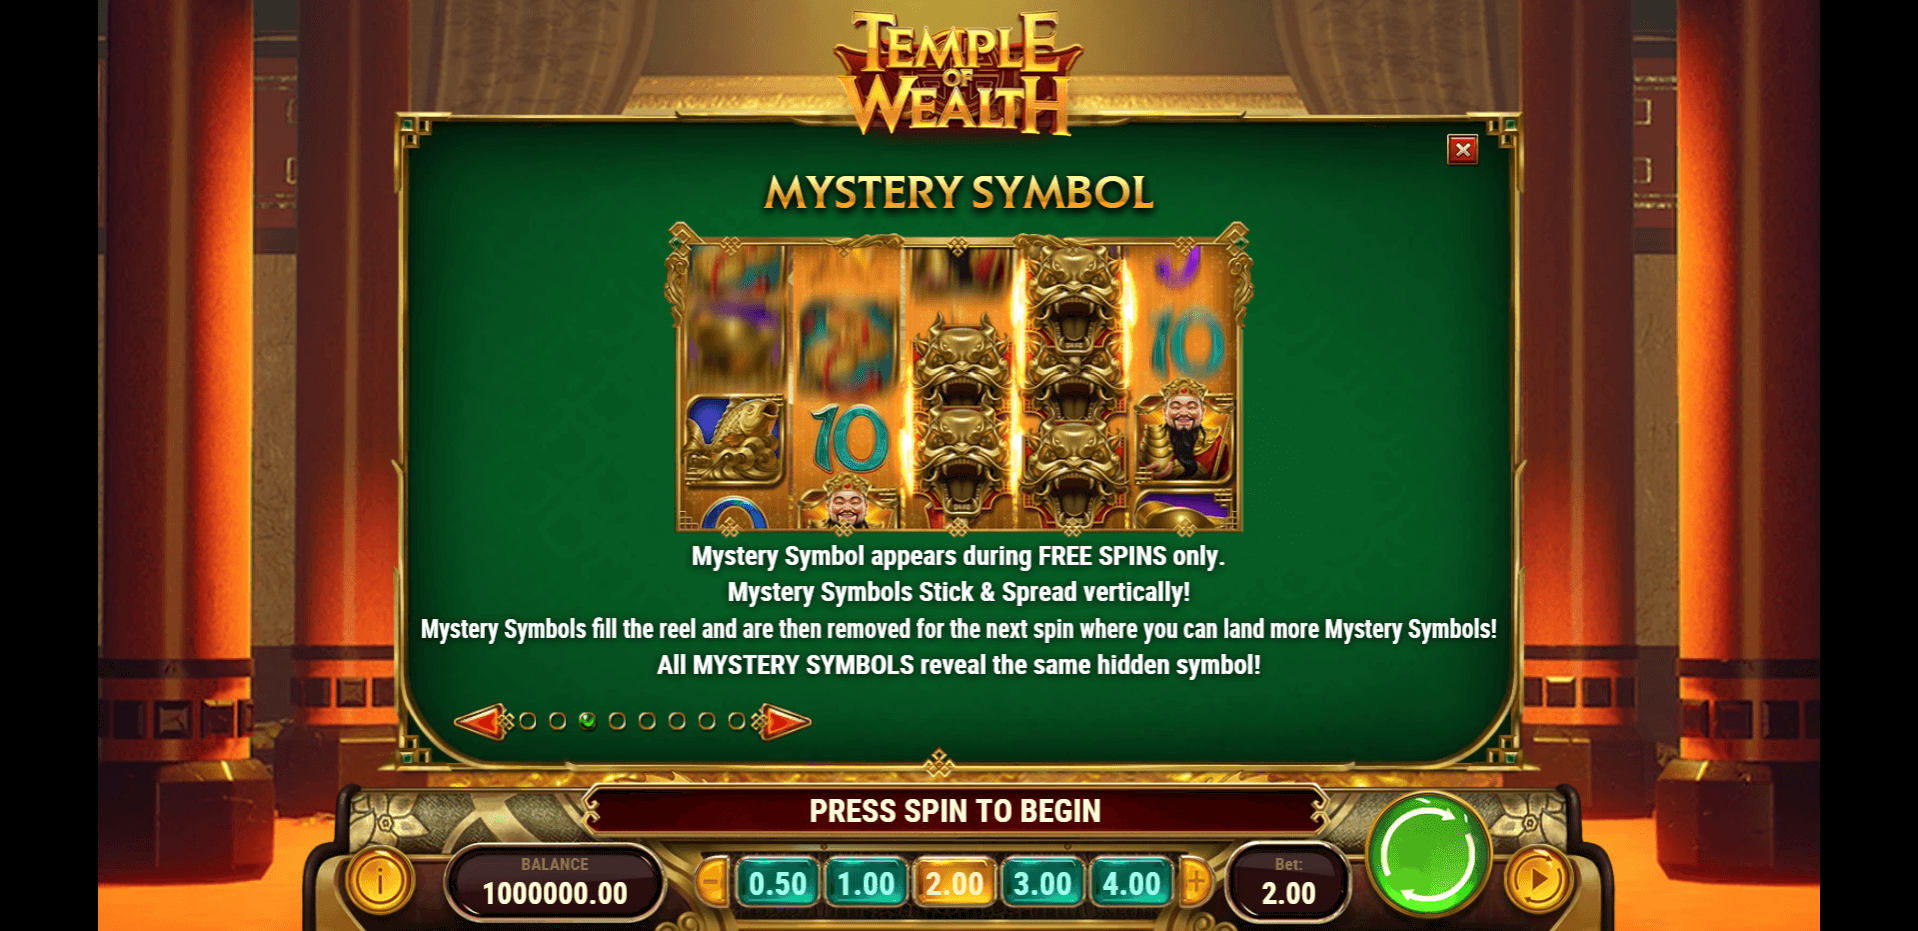 temple of wealth slot machine detail image 2